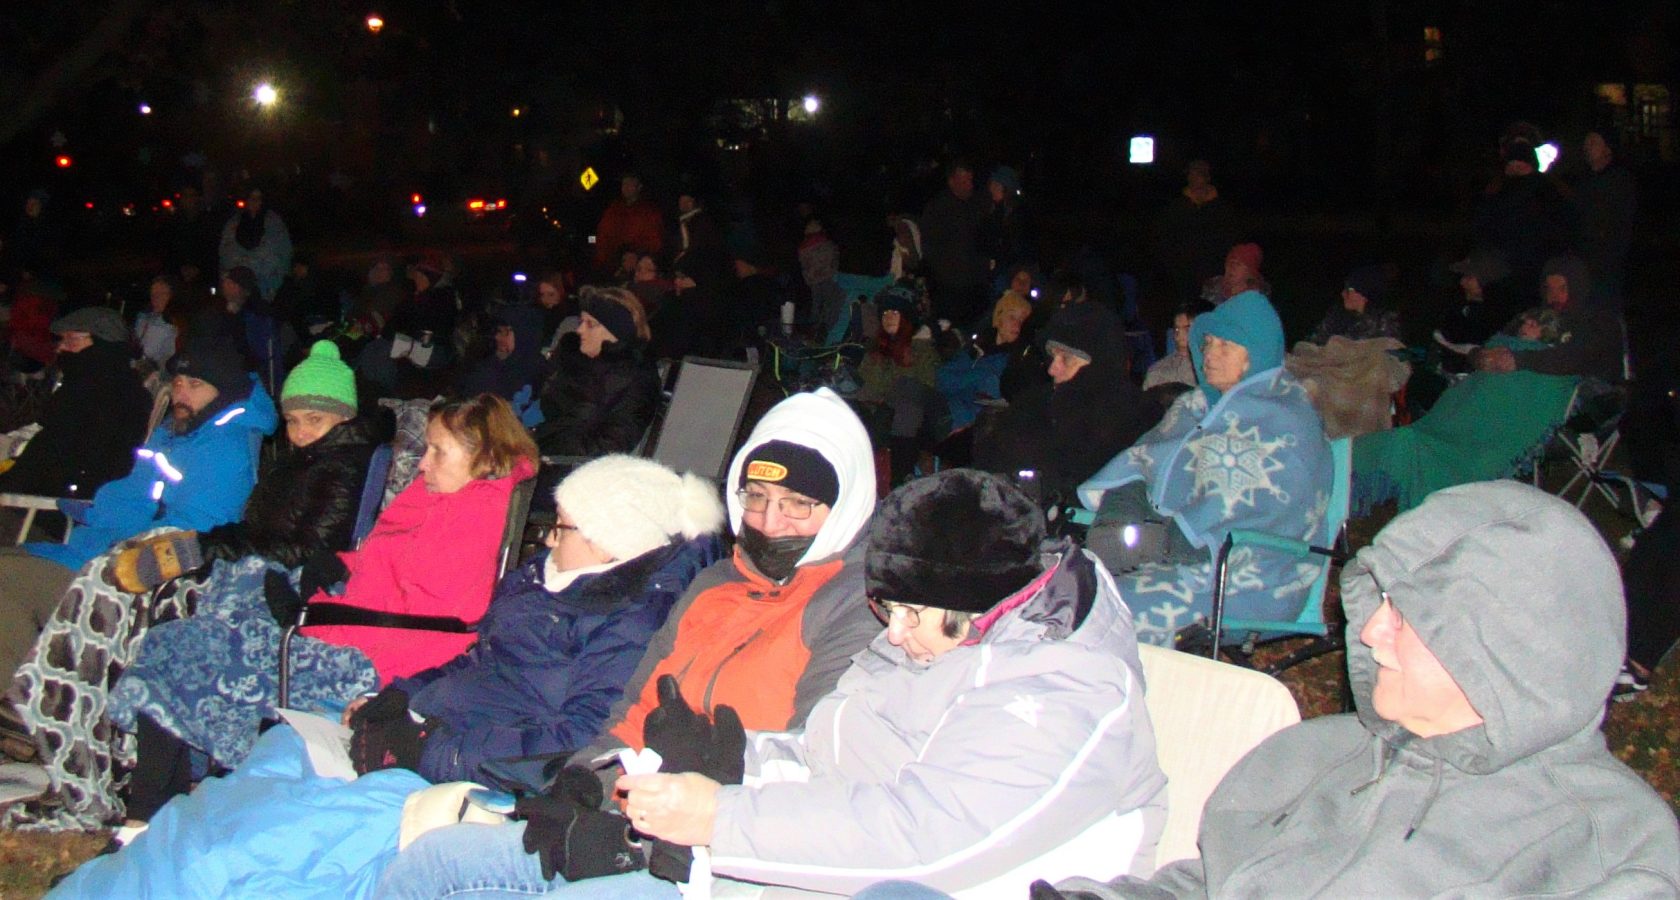 Family members bundled up for WMS concert